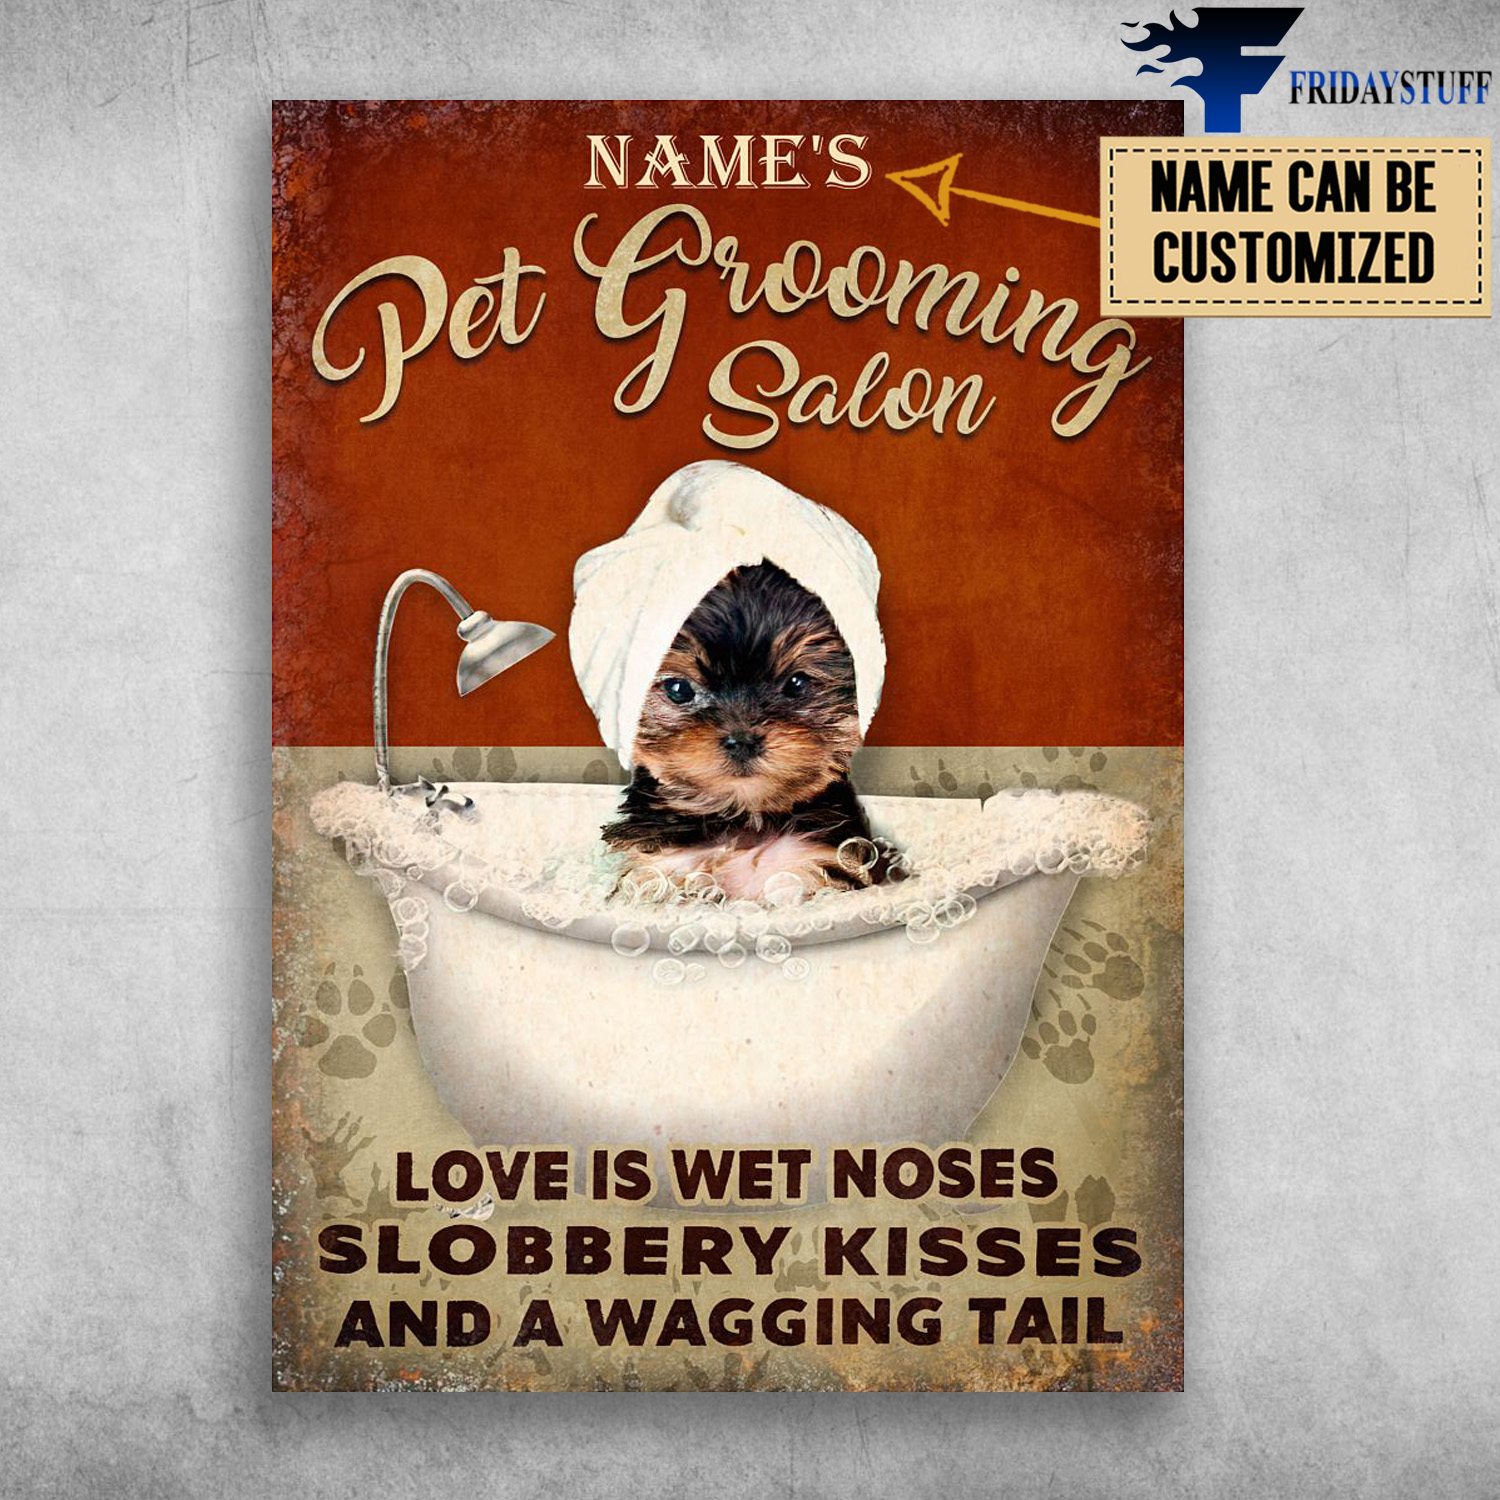 Pet Grooming Salon, Love Is Whet Noses, Slobbery Kisses, And A Wagging Tail